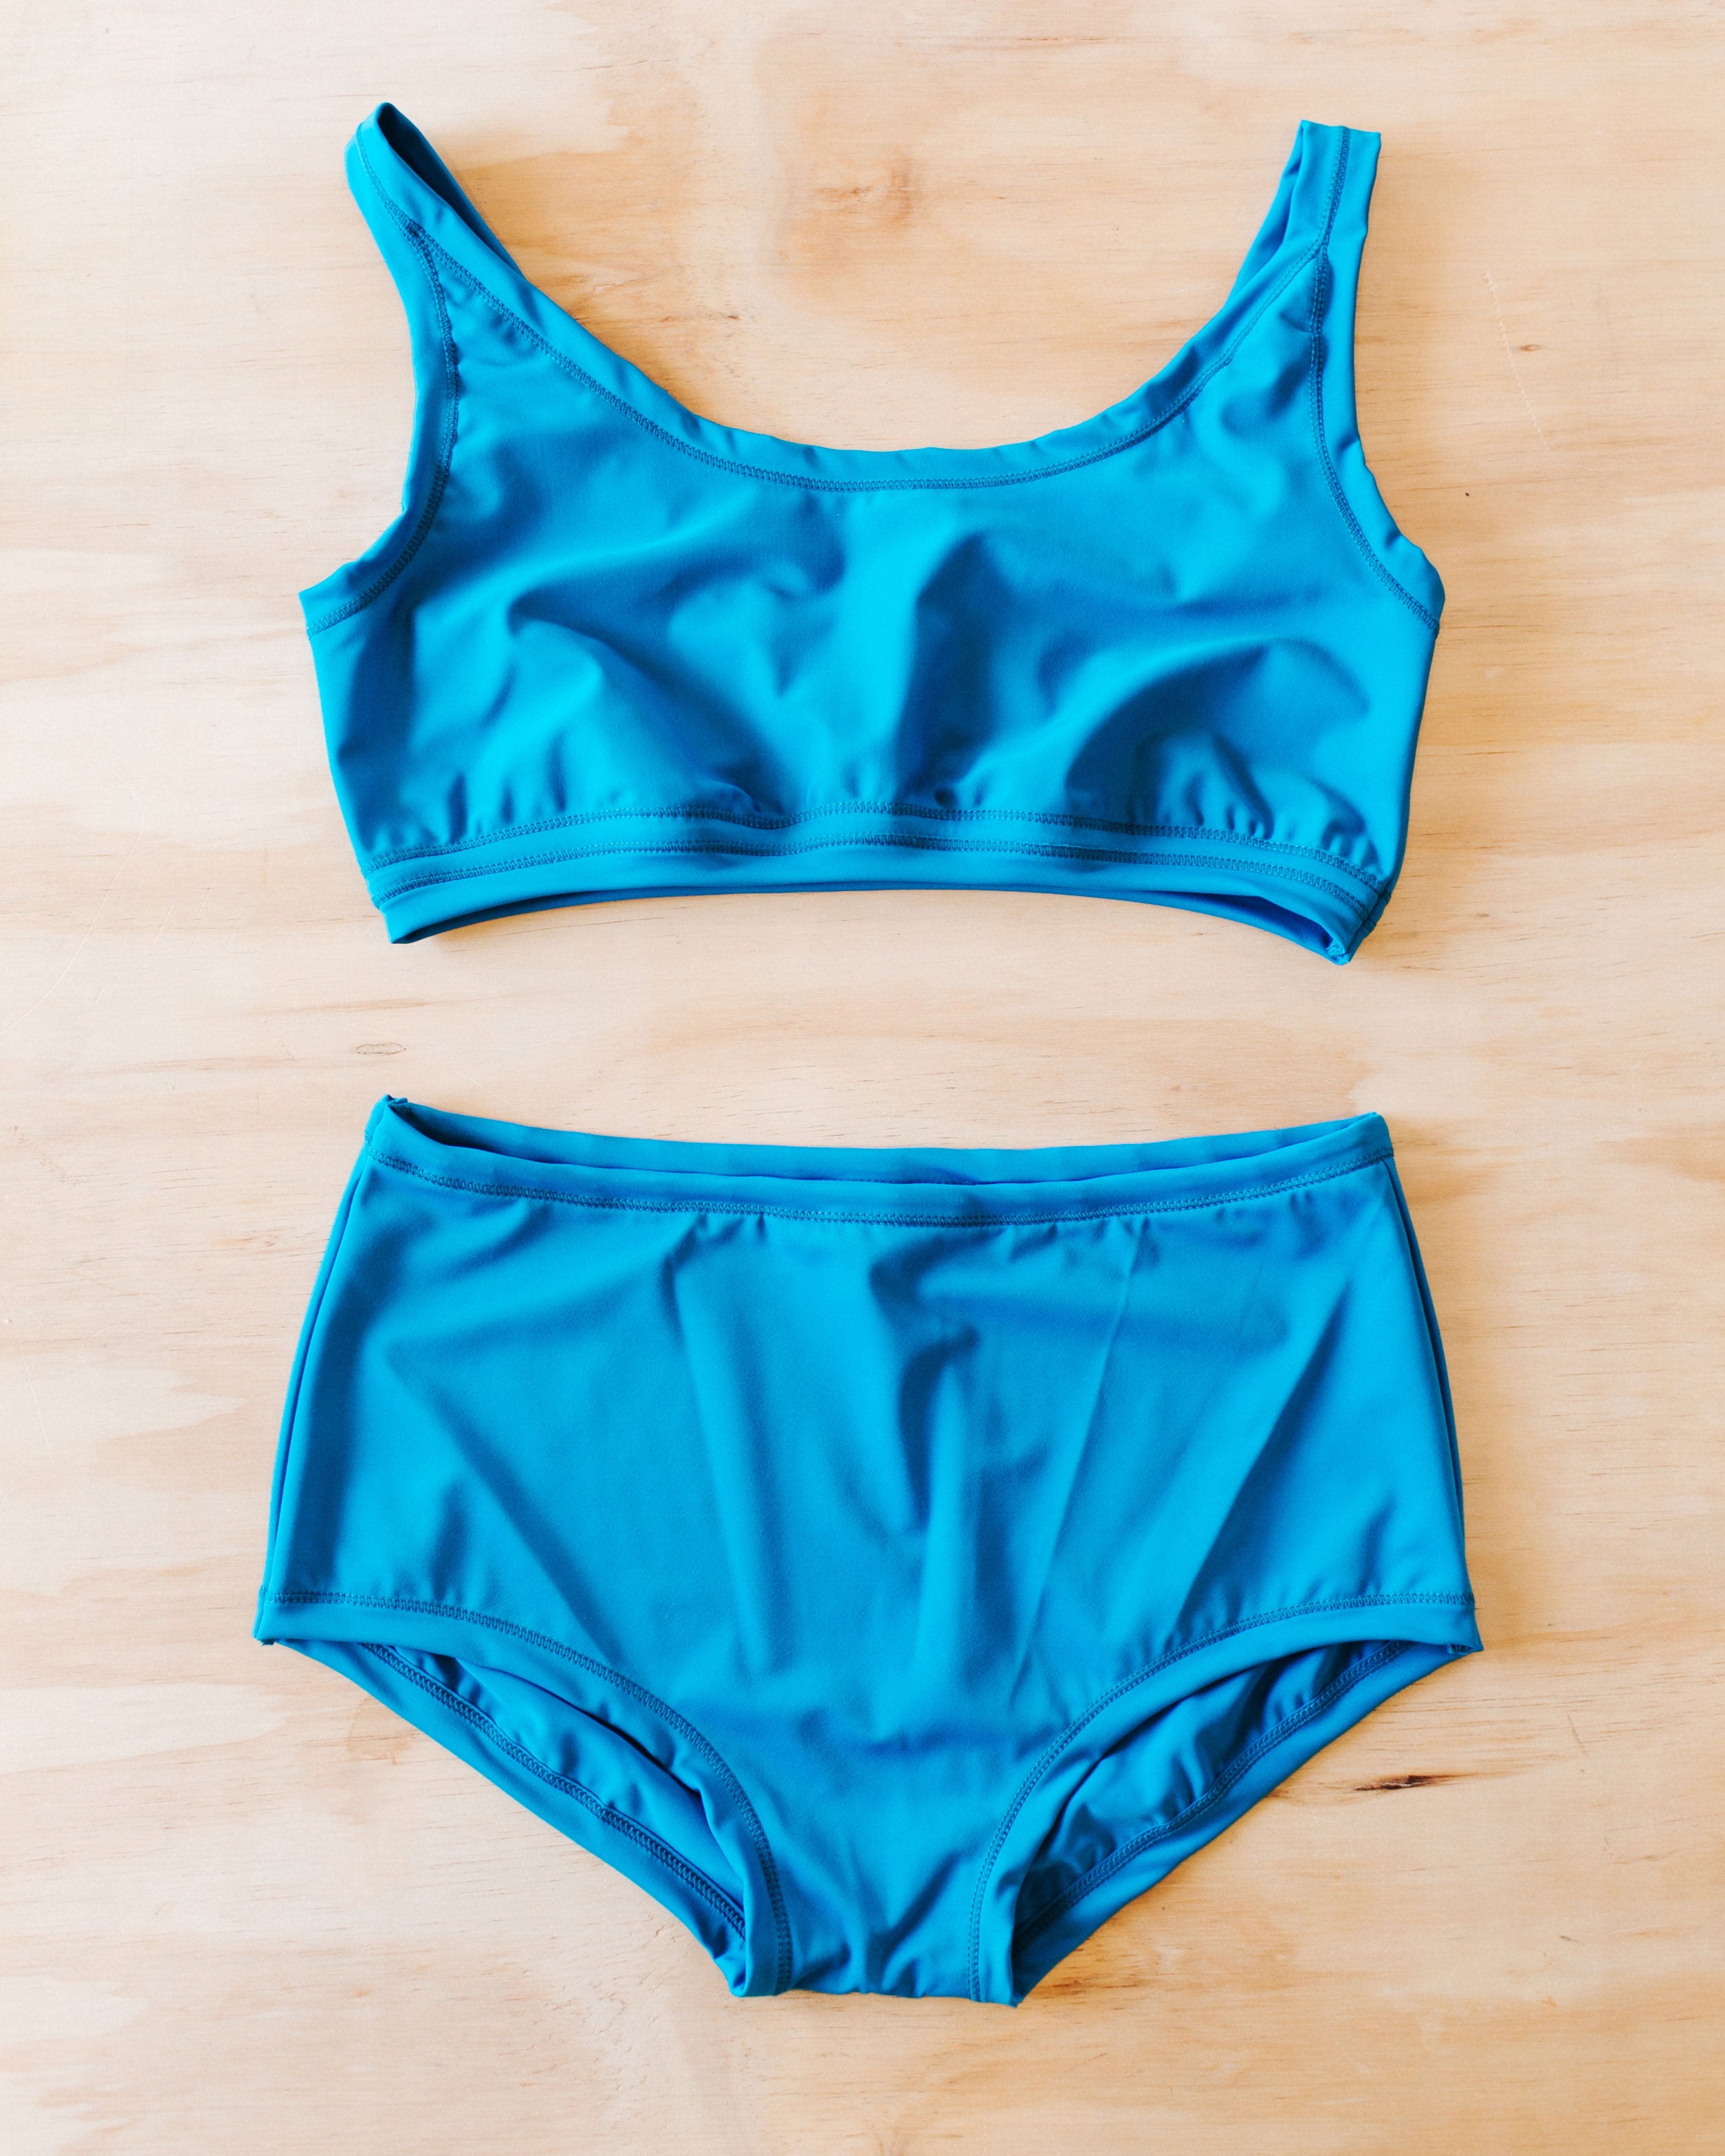 Flat lay on wood surface of Swimwear set with Original style bottoms and top in Marina Blue.